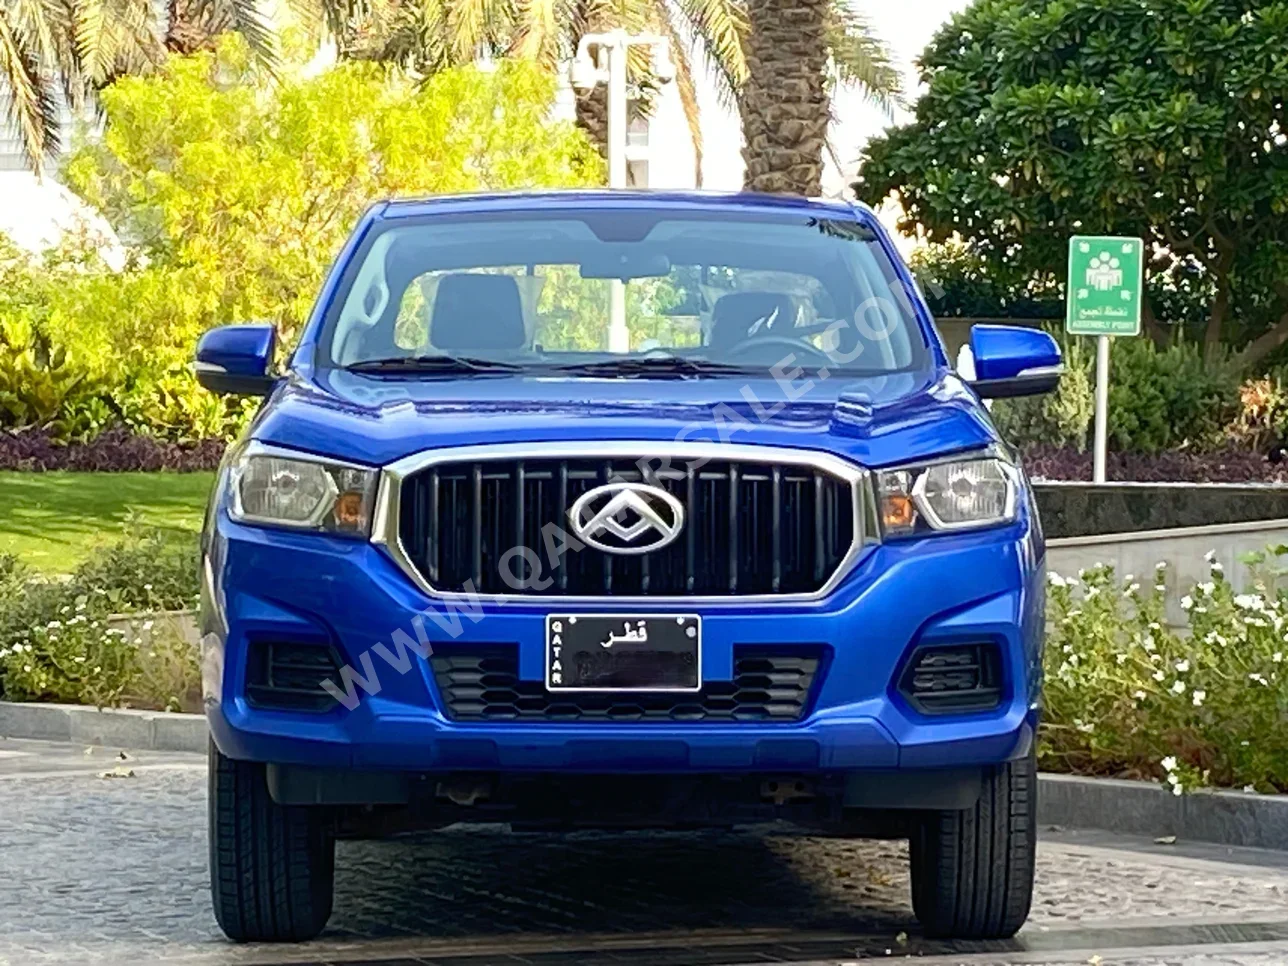 Maxus  T60  2022  Manual  5,000 Km  4 Cylinder  Rear Wheel Drive (RWD)  Pick Up  Blue  With Warranty